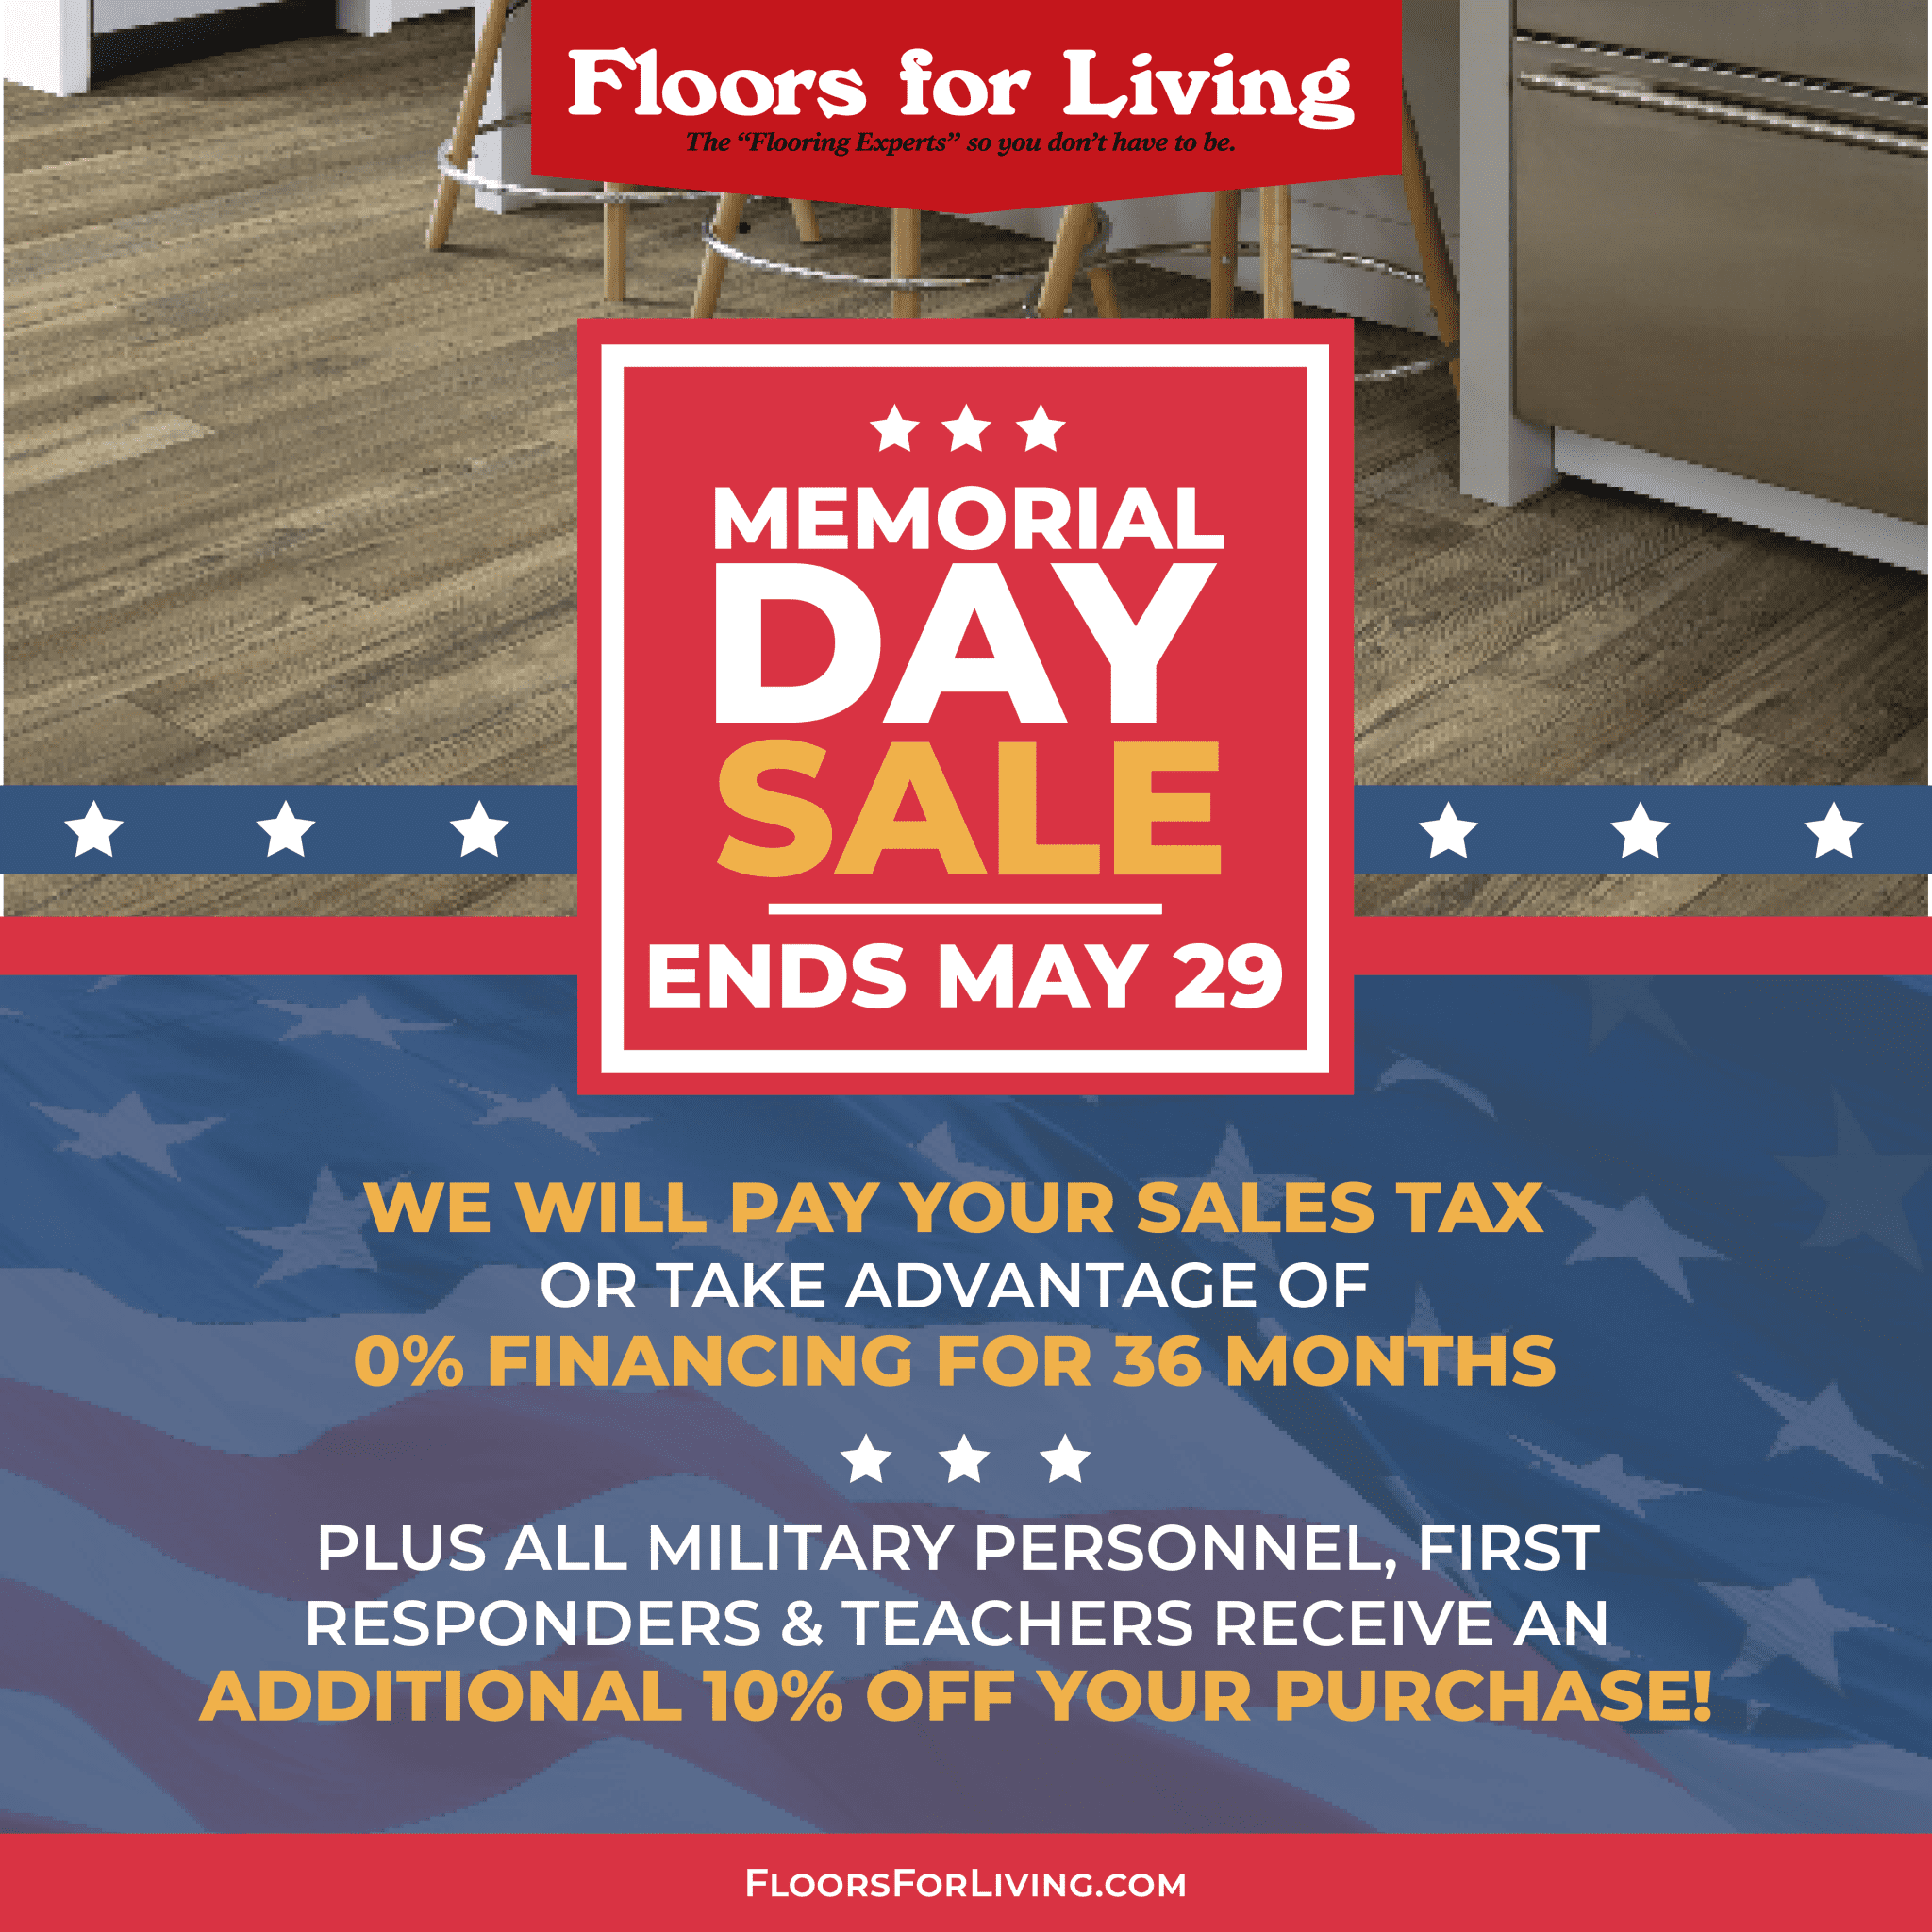 FLOORS FOR LIVING TX   Memorial Day Sales Event Social Ad Image 1080x1080 1 2048x2048 